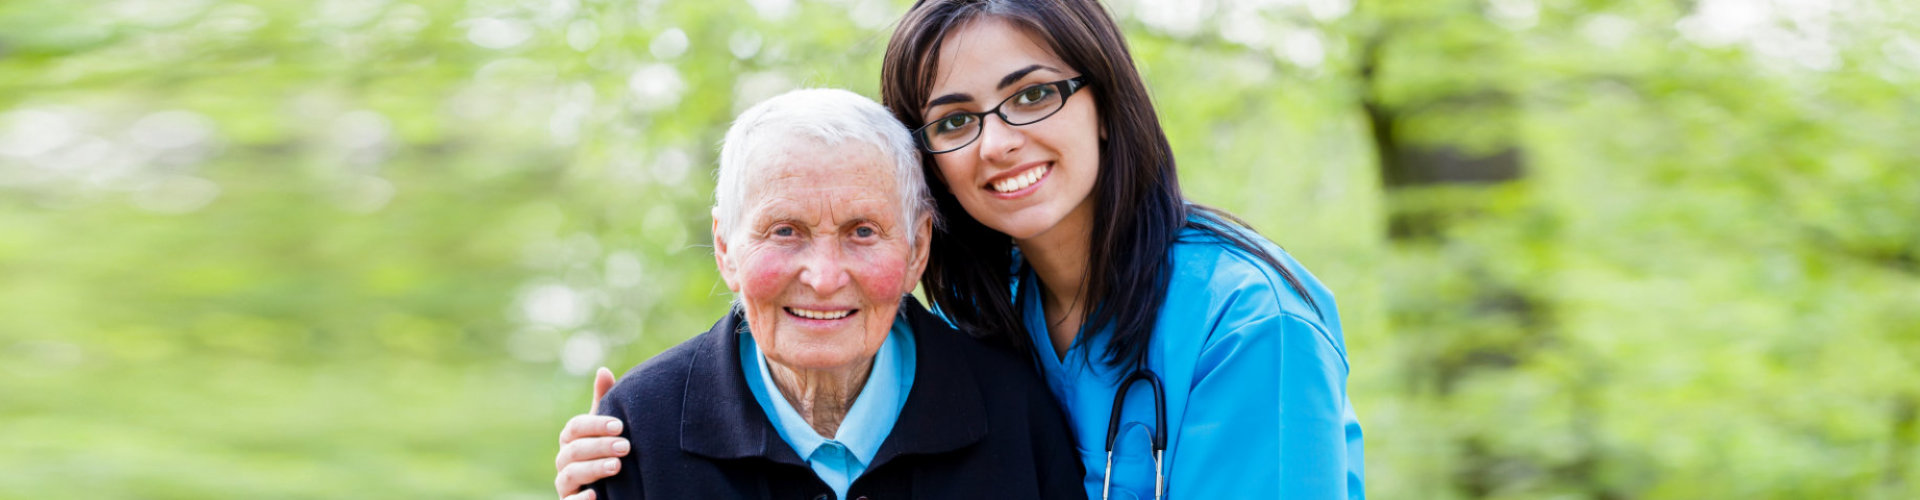 elder woman smiling with caregiver beside her